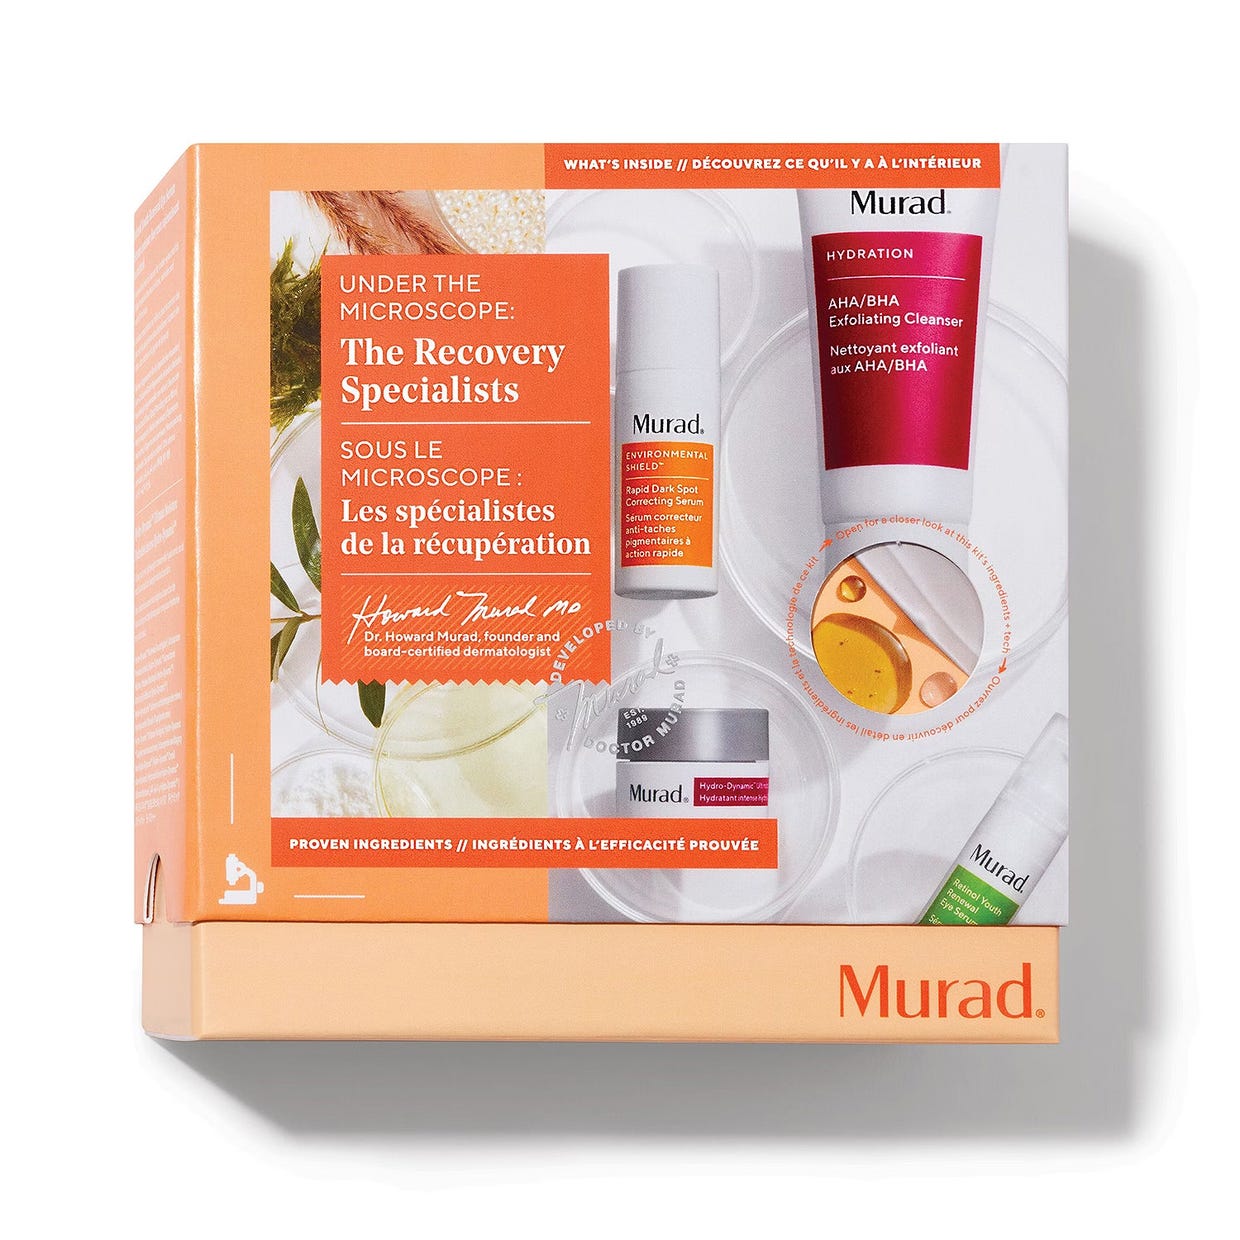 Murad skincare gift set with AHA/BHA Exfoliating Cleanser, Rapid Dark Spot Serum, and Hydro-Dynamic Quenching Essence samples.